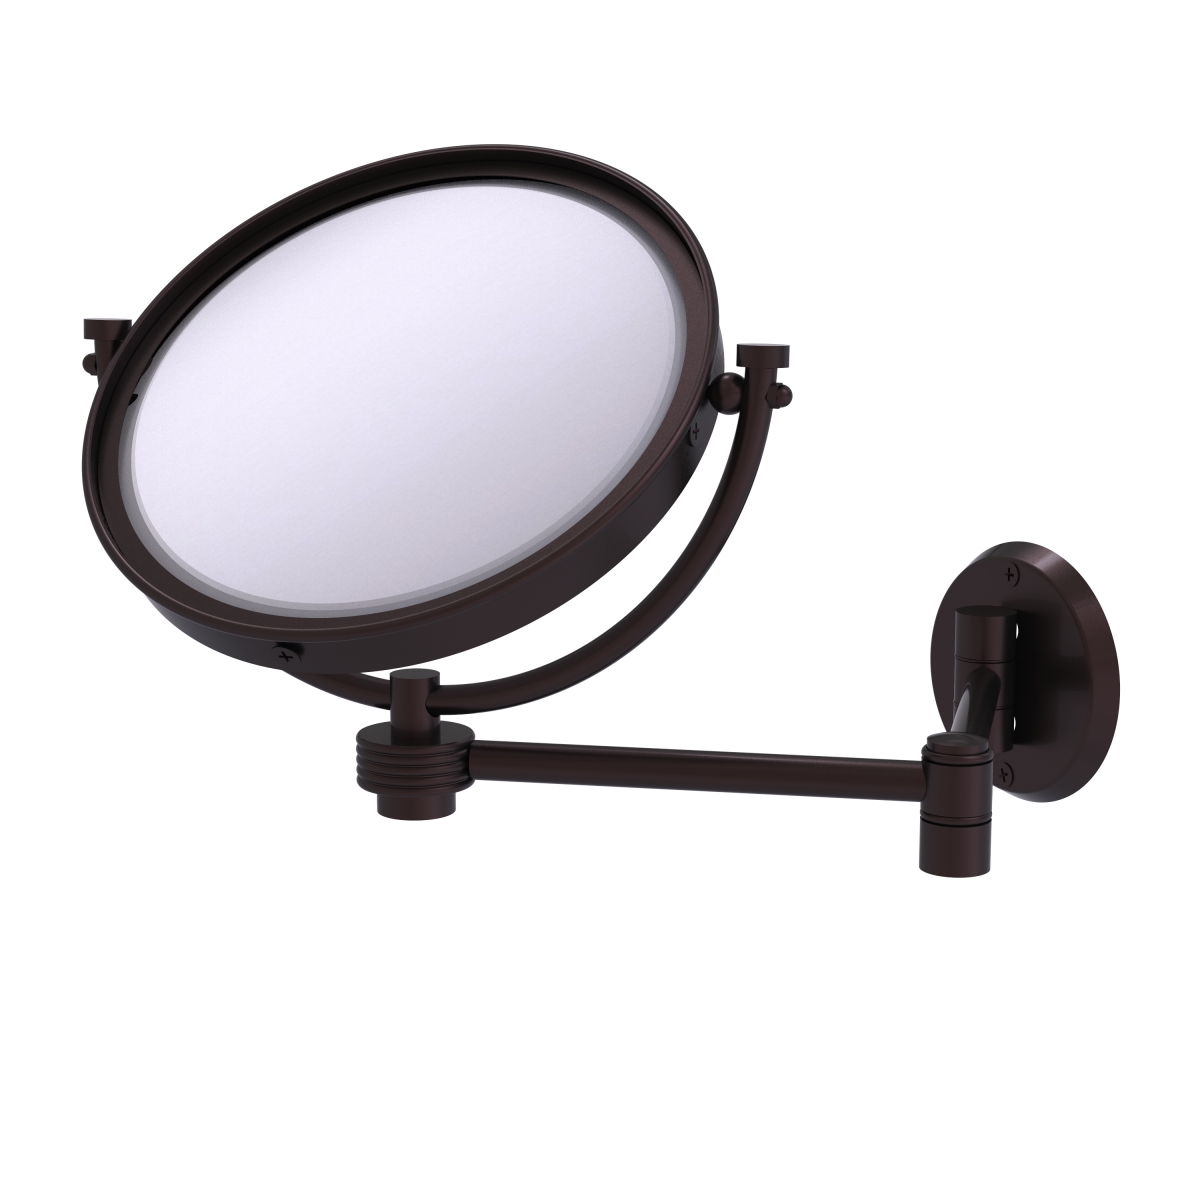 WM-6G-2X-ABZ 8 in. Wall Mounted Extending Make-Up Mirror 2X Magnification with Groovy Accent, Antique Bronze -  Allied Brass, WM-6G/2X-ABZ